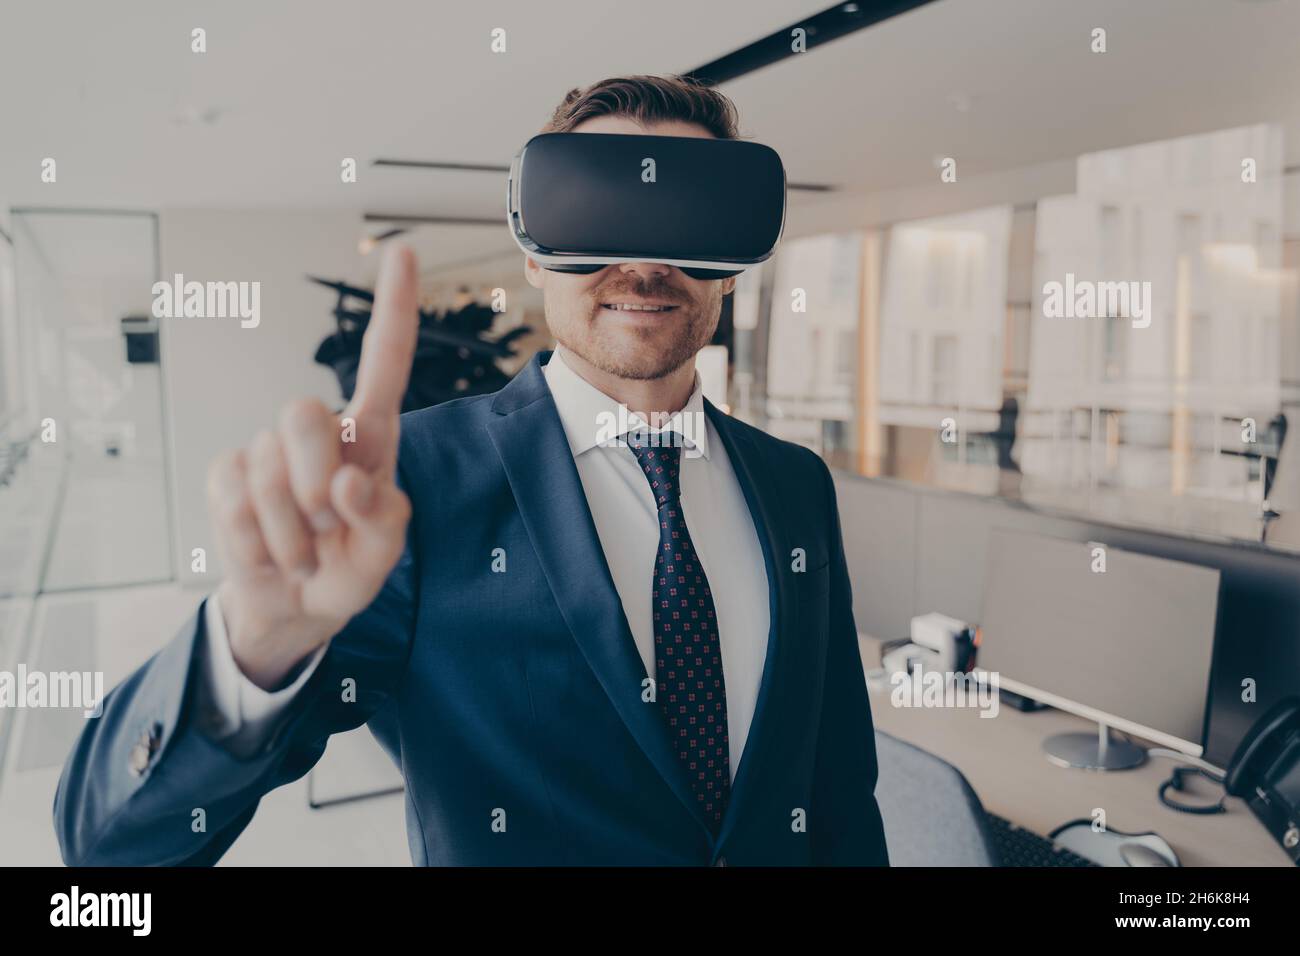 CEO man stands in office with VR headset and interacts with application virtual interface Stock Photo